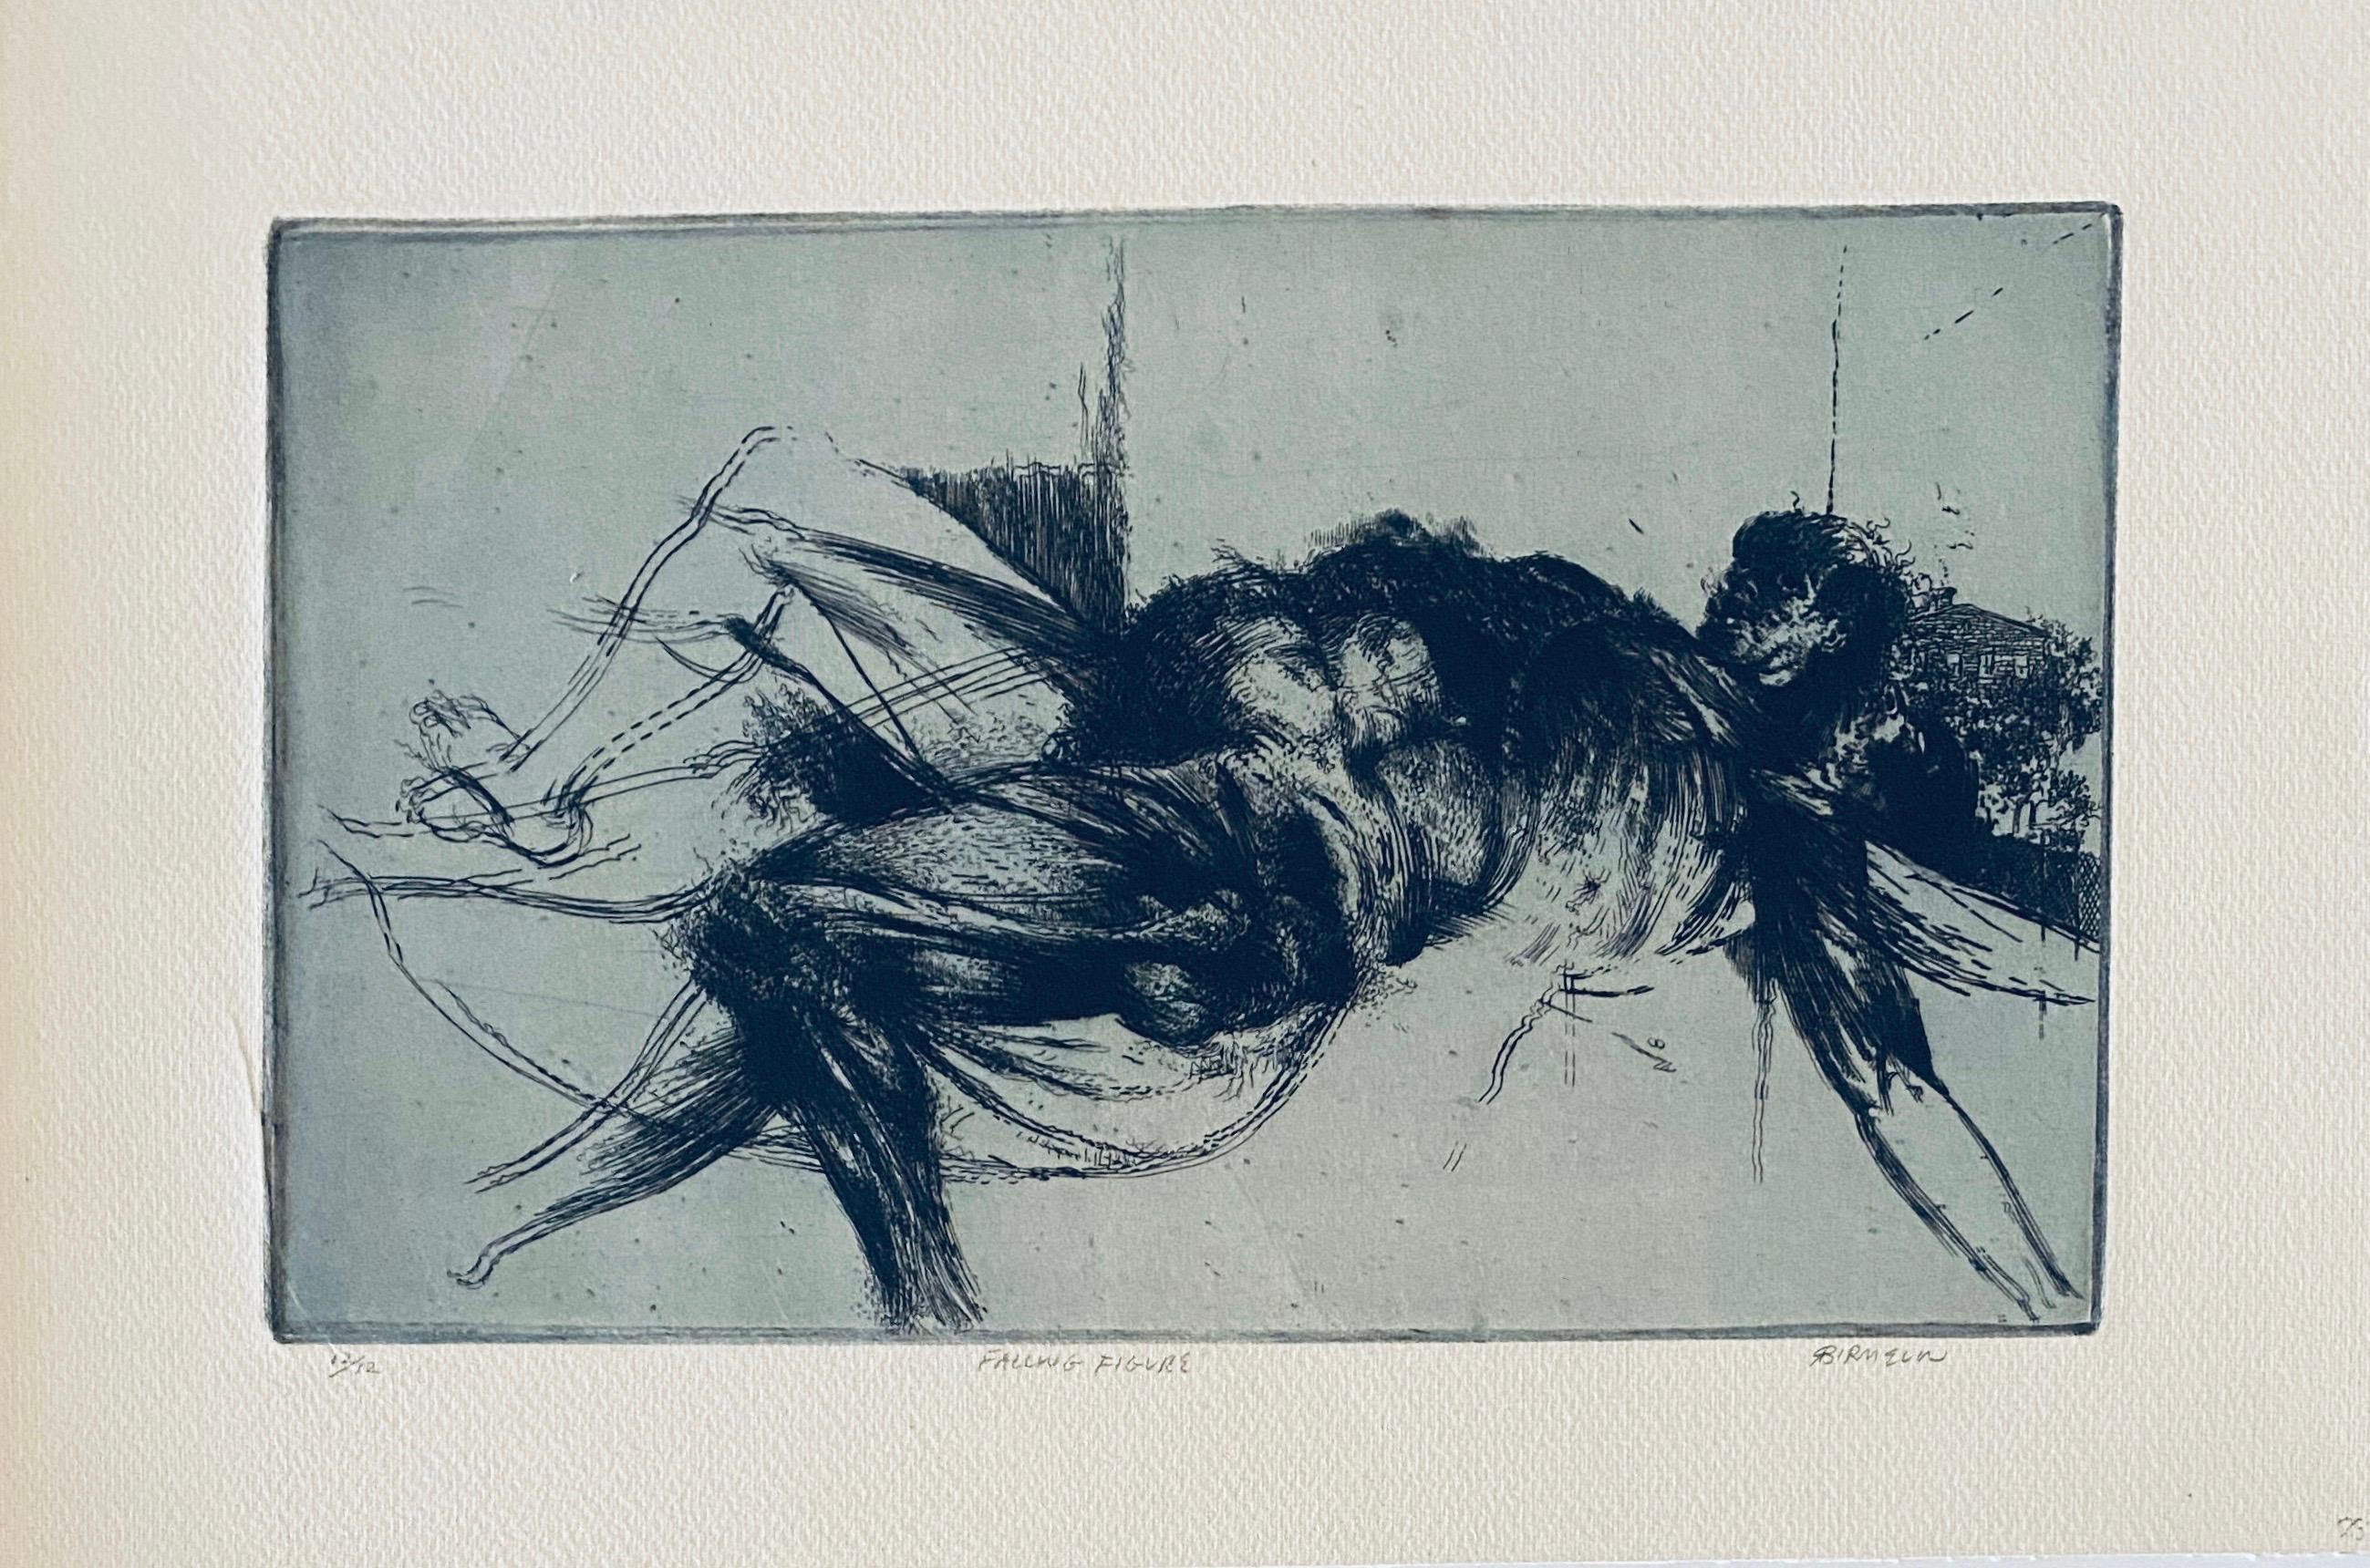 Falling Figure, American Modernist Abstract Etching - Print by Robert A. Birmelin